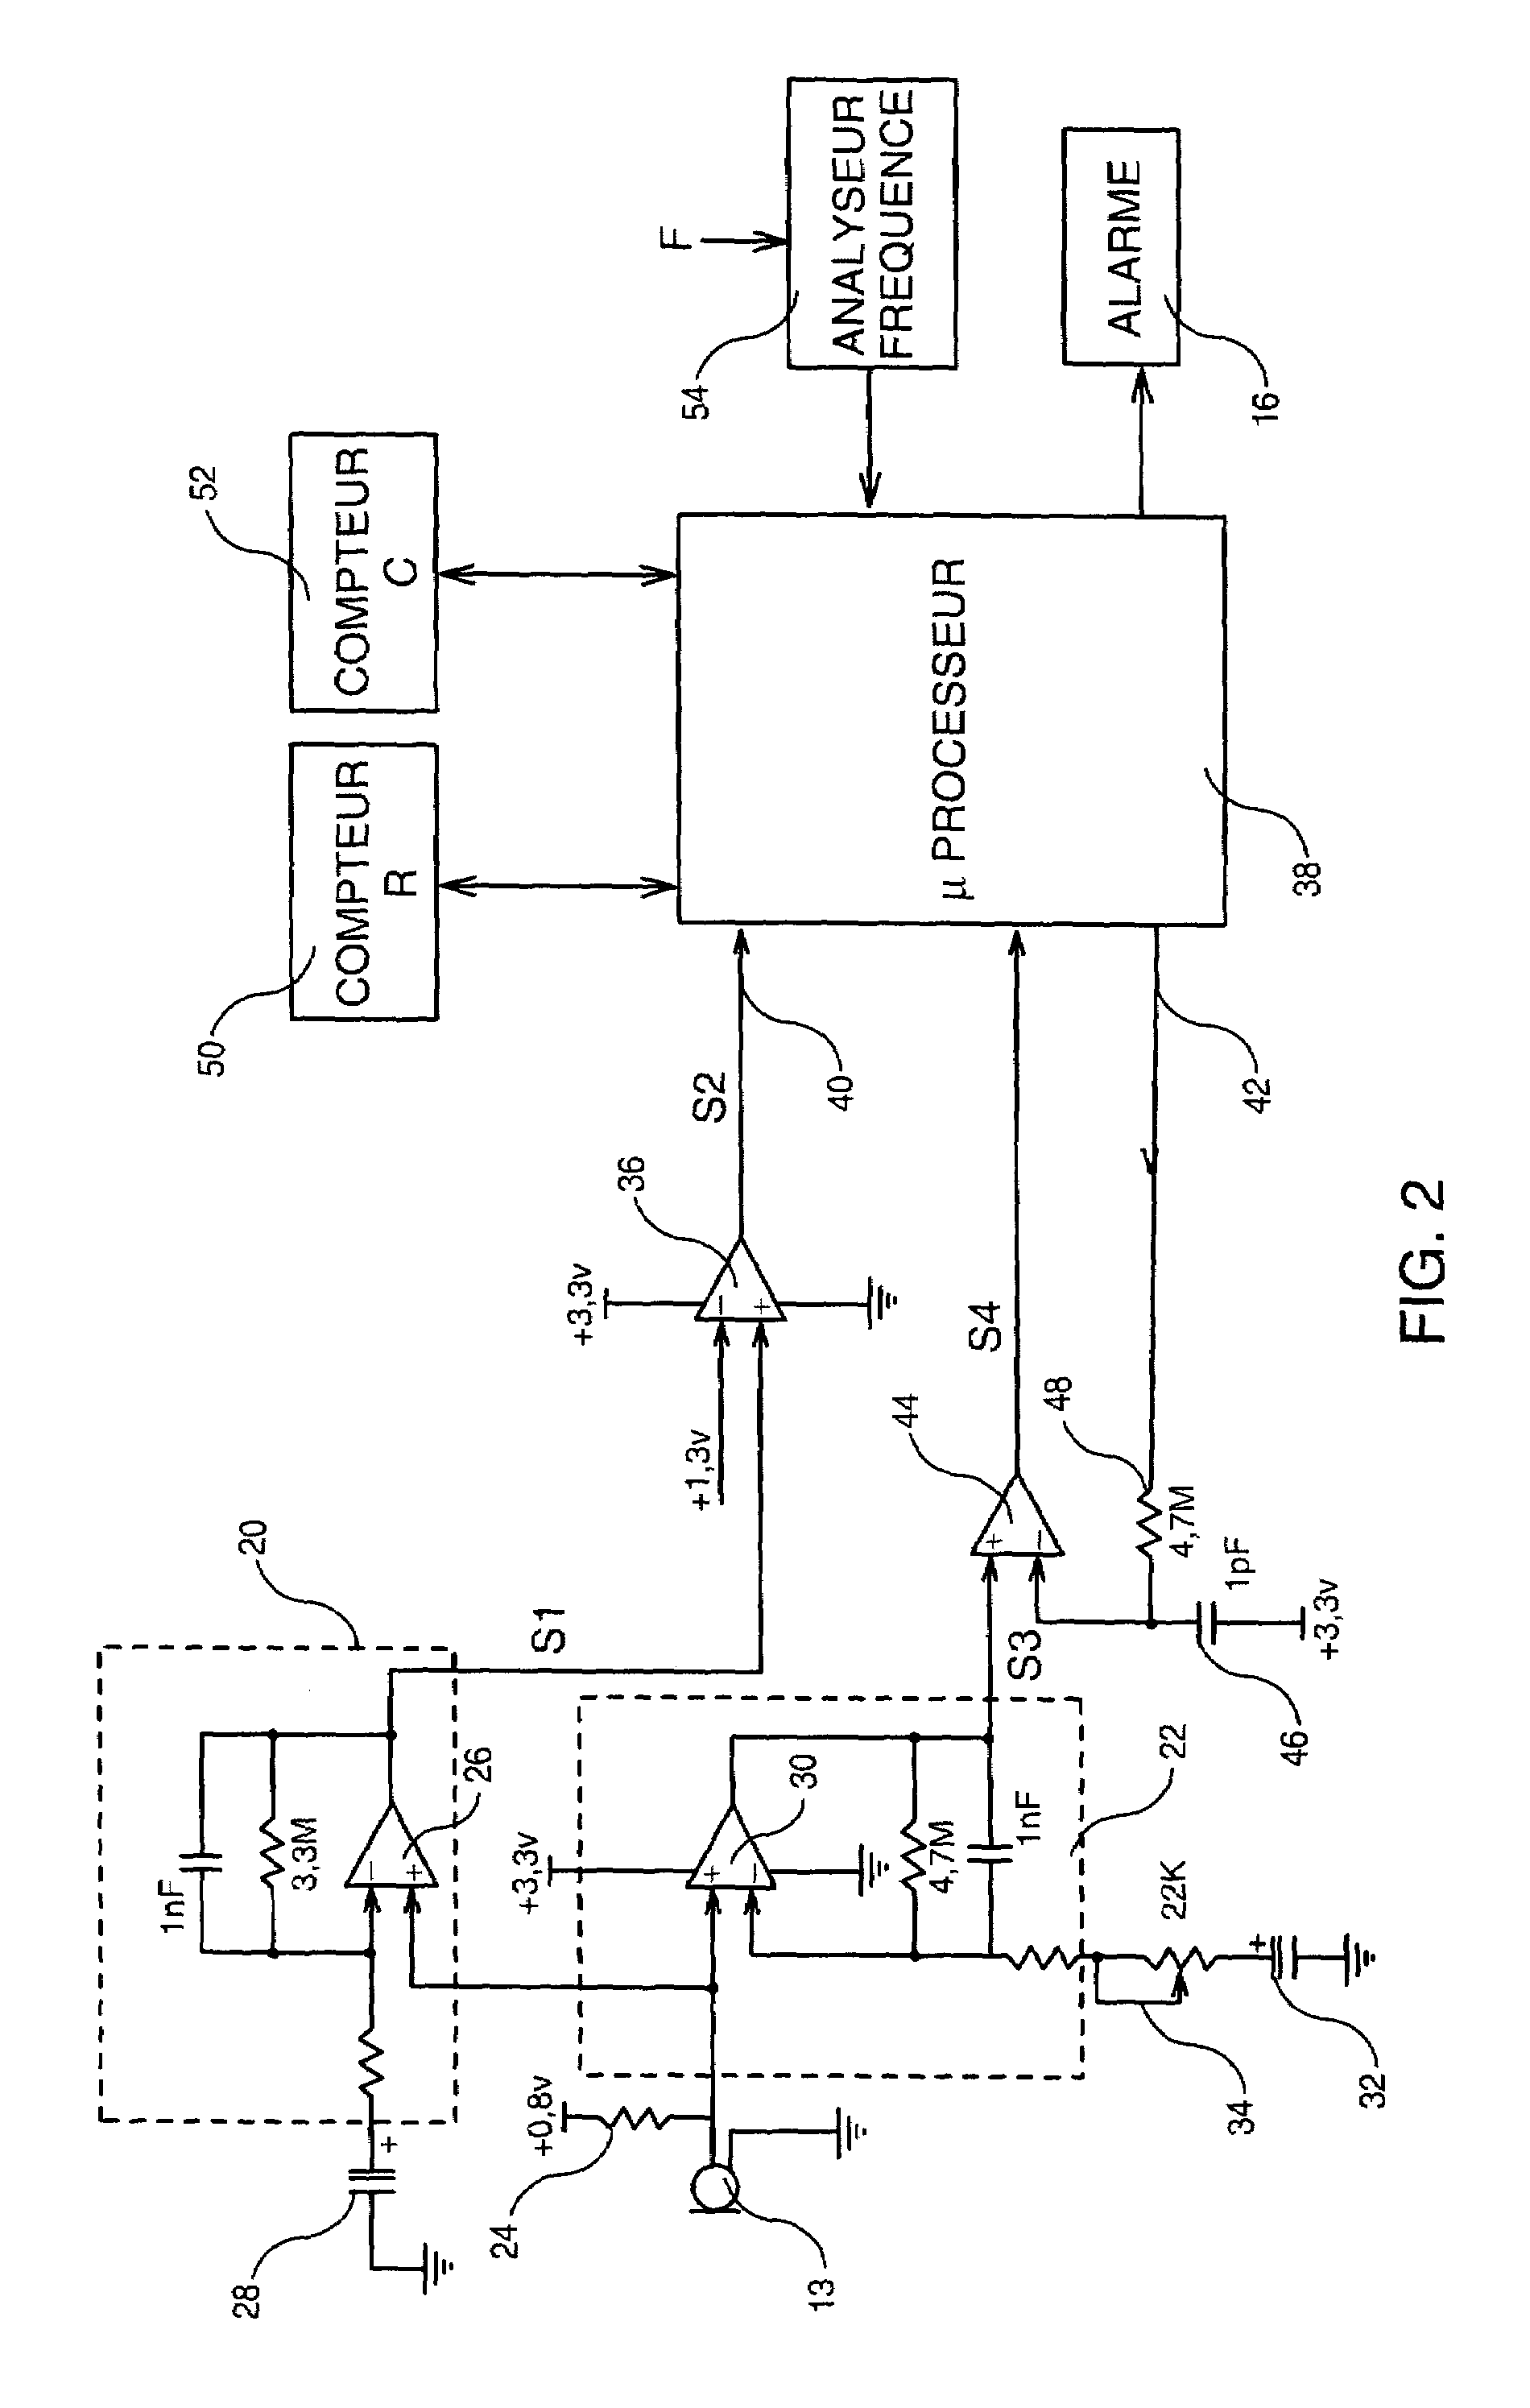 Device for detecting a body falling into a swimming pool